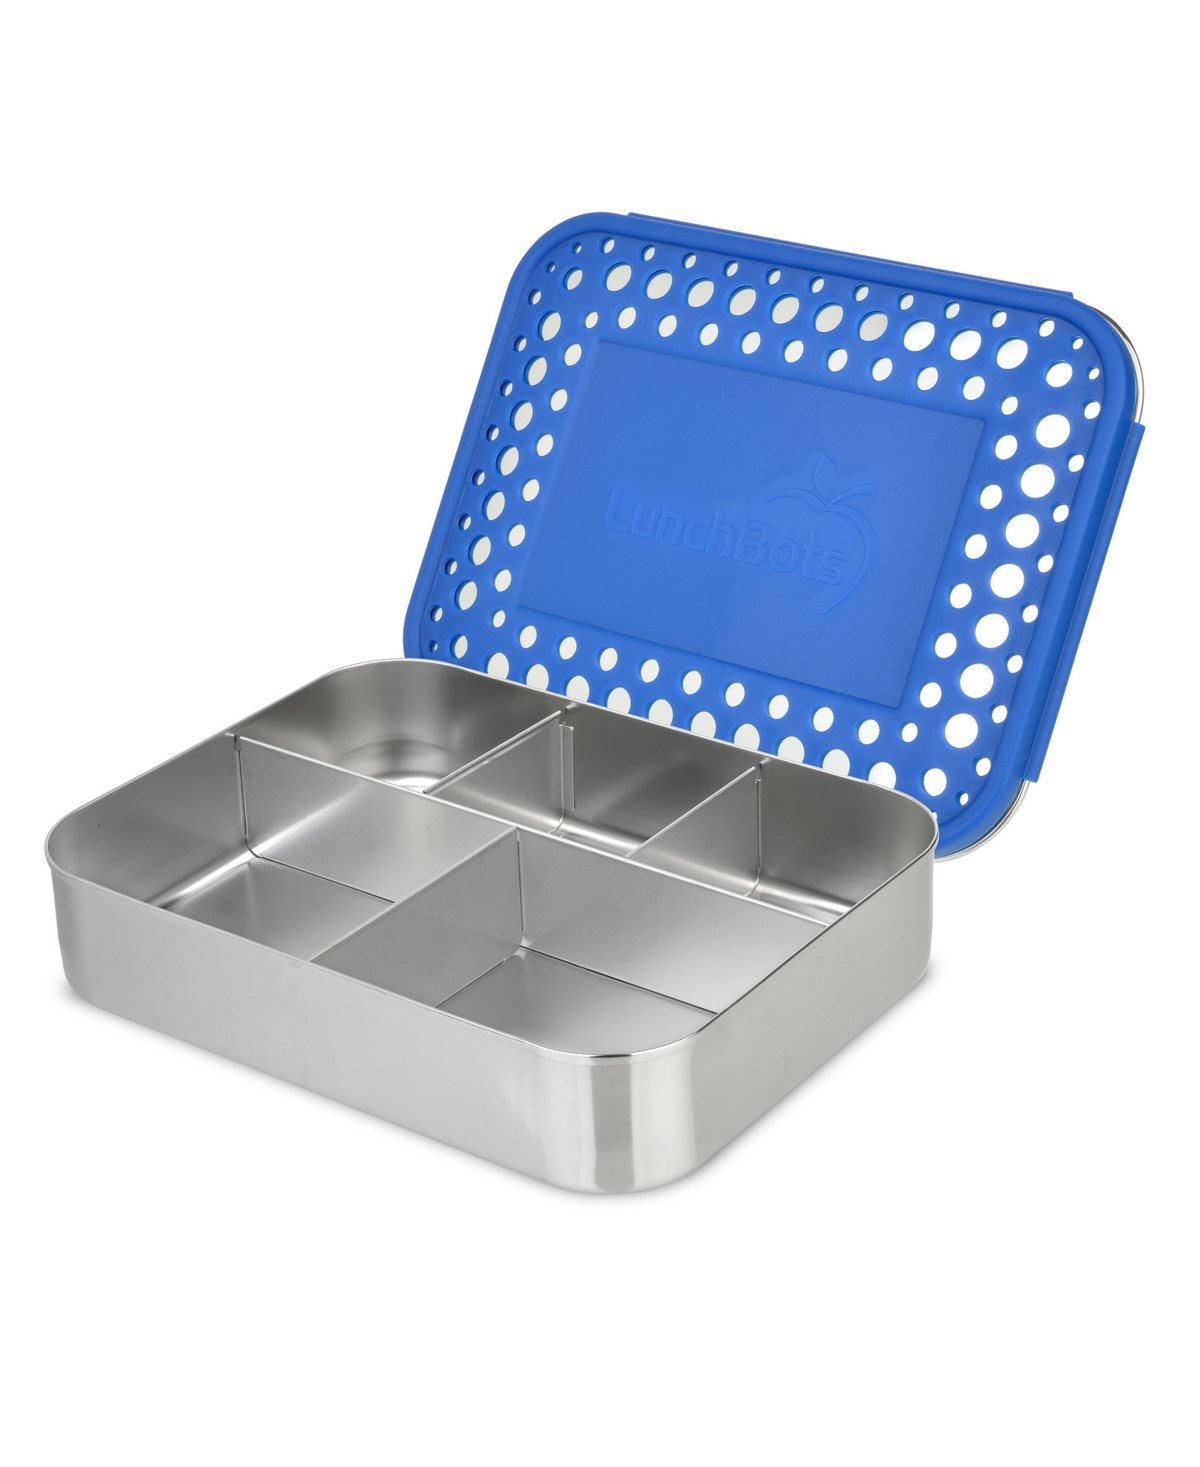 Lunchbots Large Stainless Steel Bento Lunch Box 5 Sections In Blue Dots